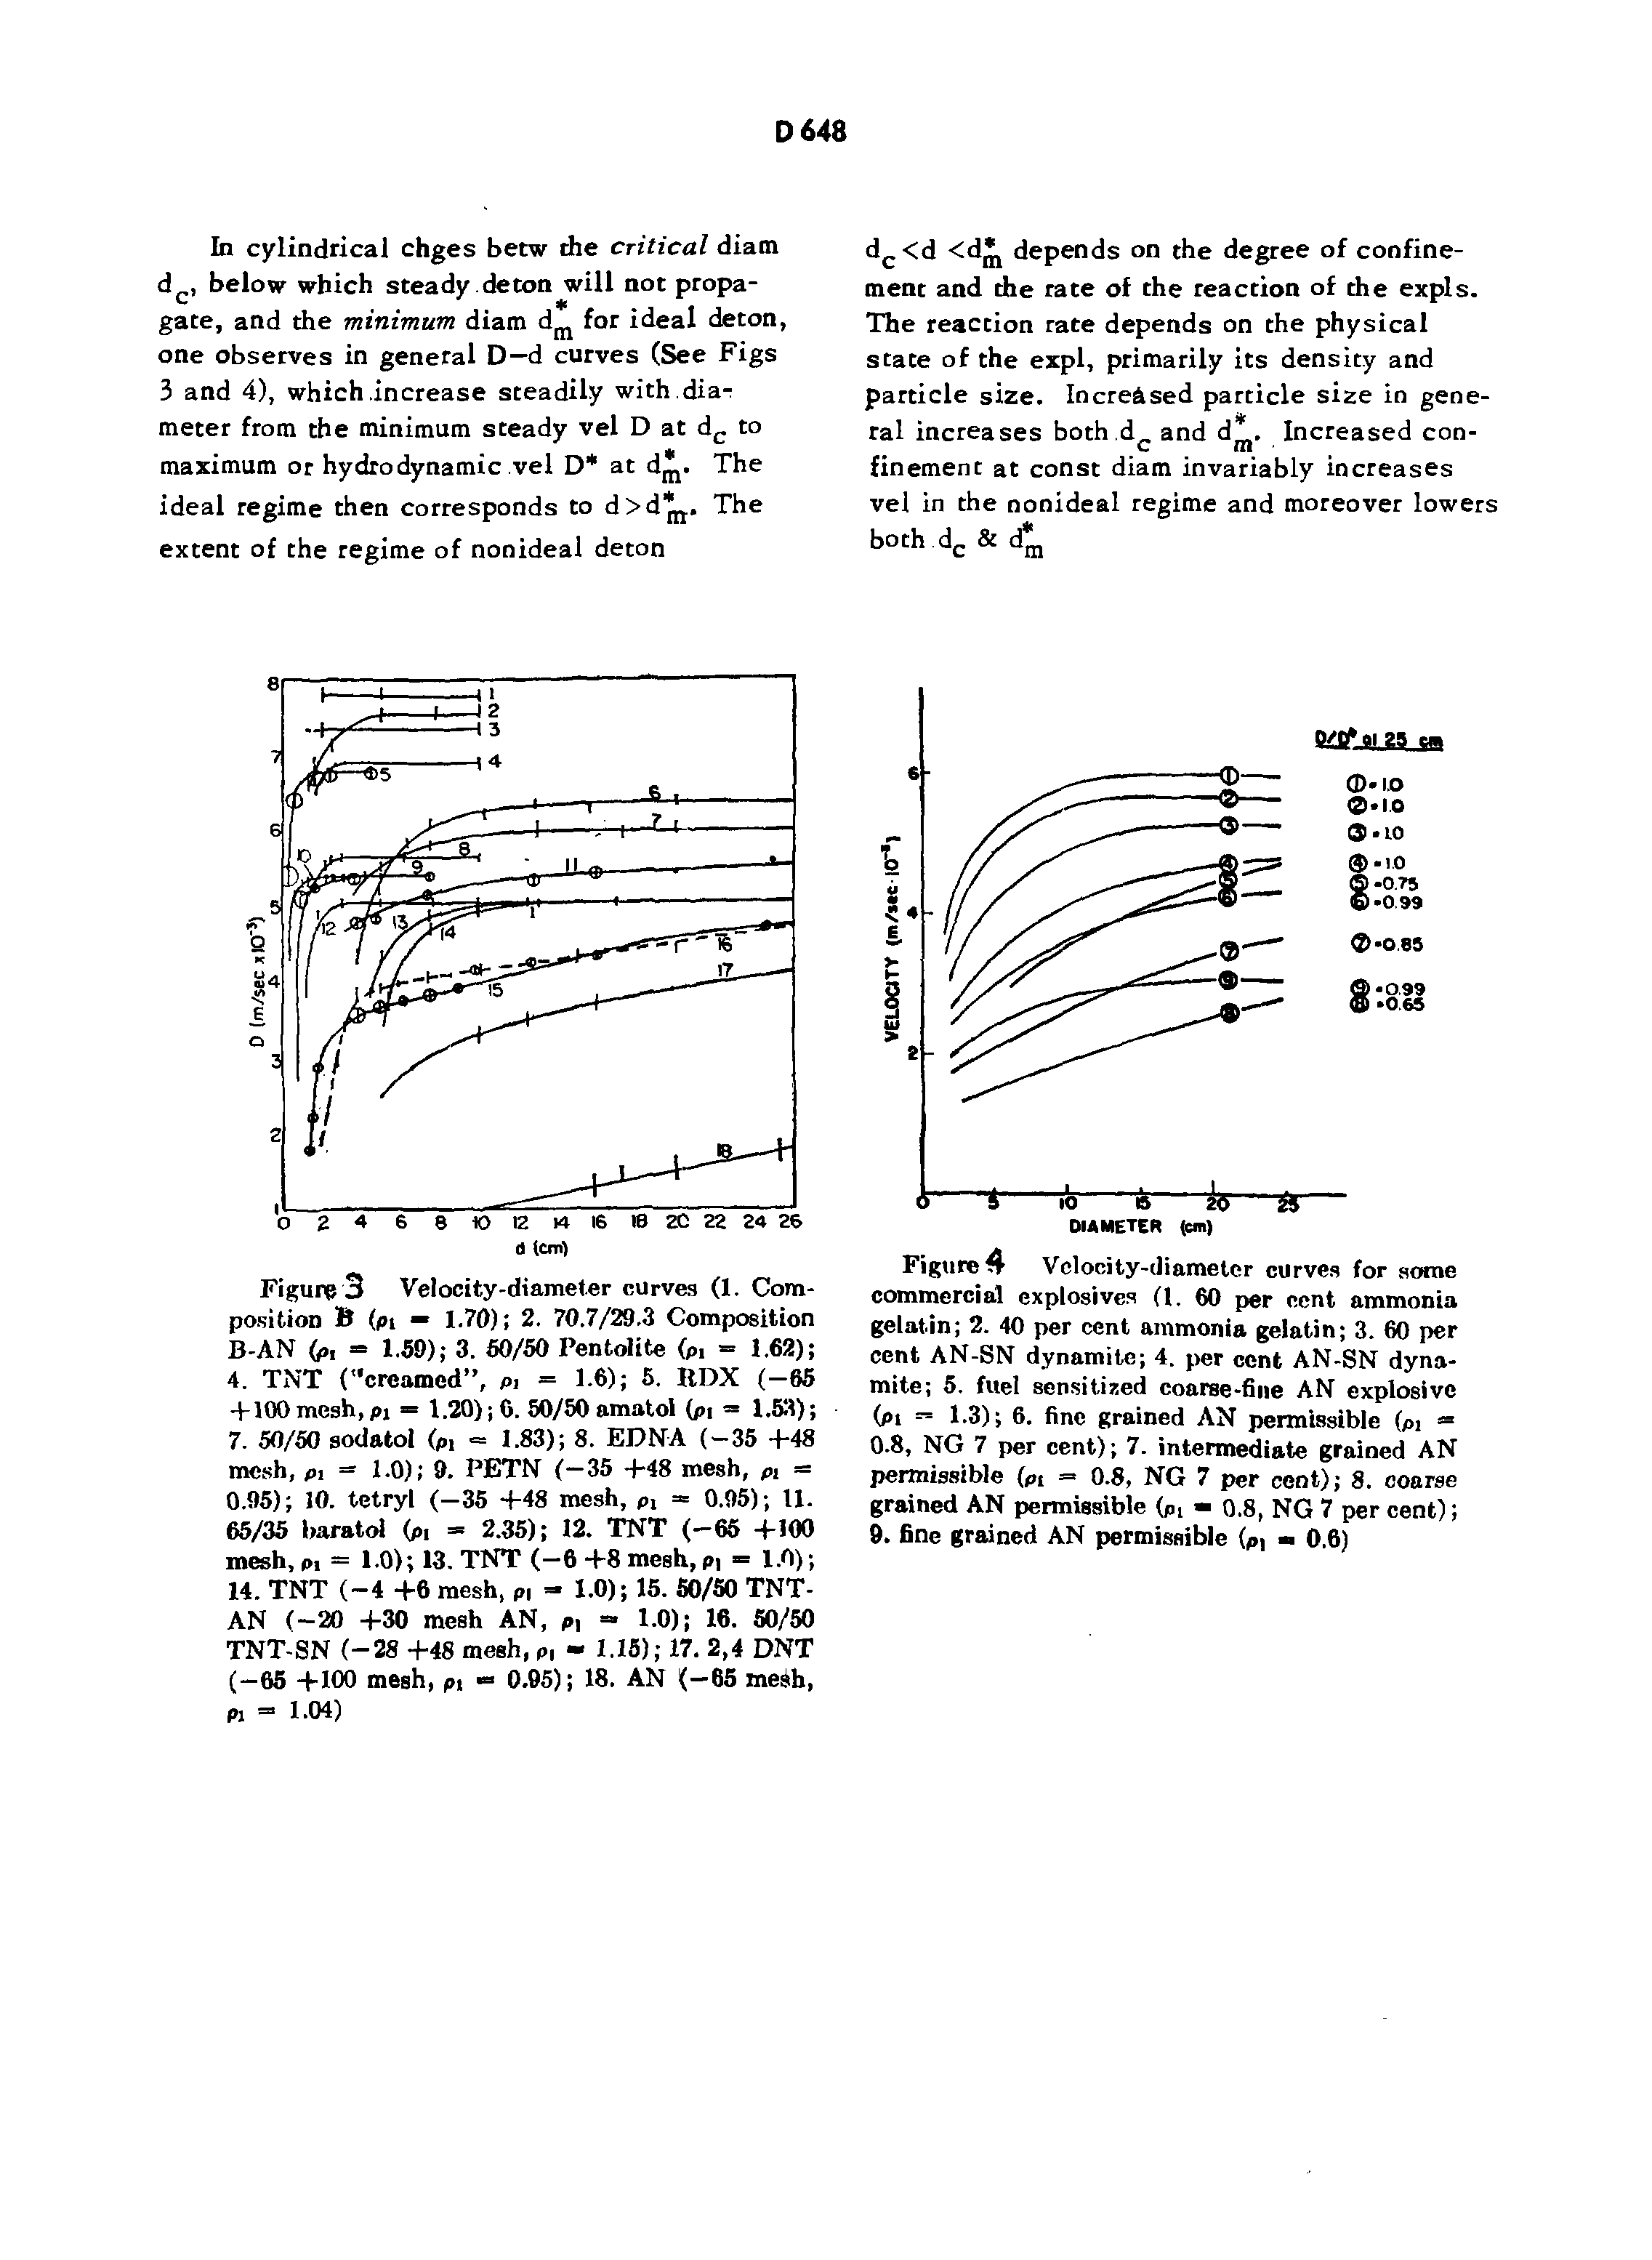 Figure 4 Velocity-diameter curves for some commercial explosives (1. 60 per cent ammonia gelatin 2. 40 per cent ammonia gelatin 3. 60 per cent AN-SN dynamite 4. per cent AN-SN dynamite 5. fuel sensitized coarse-fine AN explosive (pi — 1.3) 6. fine grained AN permissible (pi 0.8, NG 7 per cent) 7. intermediate grained AN permissible (pi = 0.8, NG 7 per cent) 8. coarse grained AN permissible (Pl - 0.8, NG 7 per cent) 9. fine grained AN permissible (pi 0.6)...